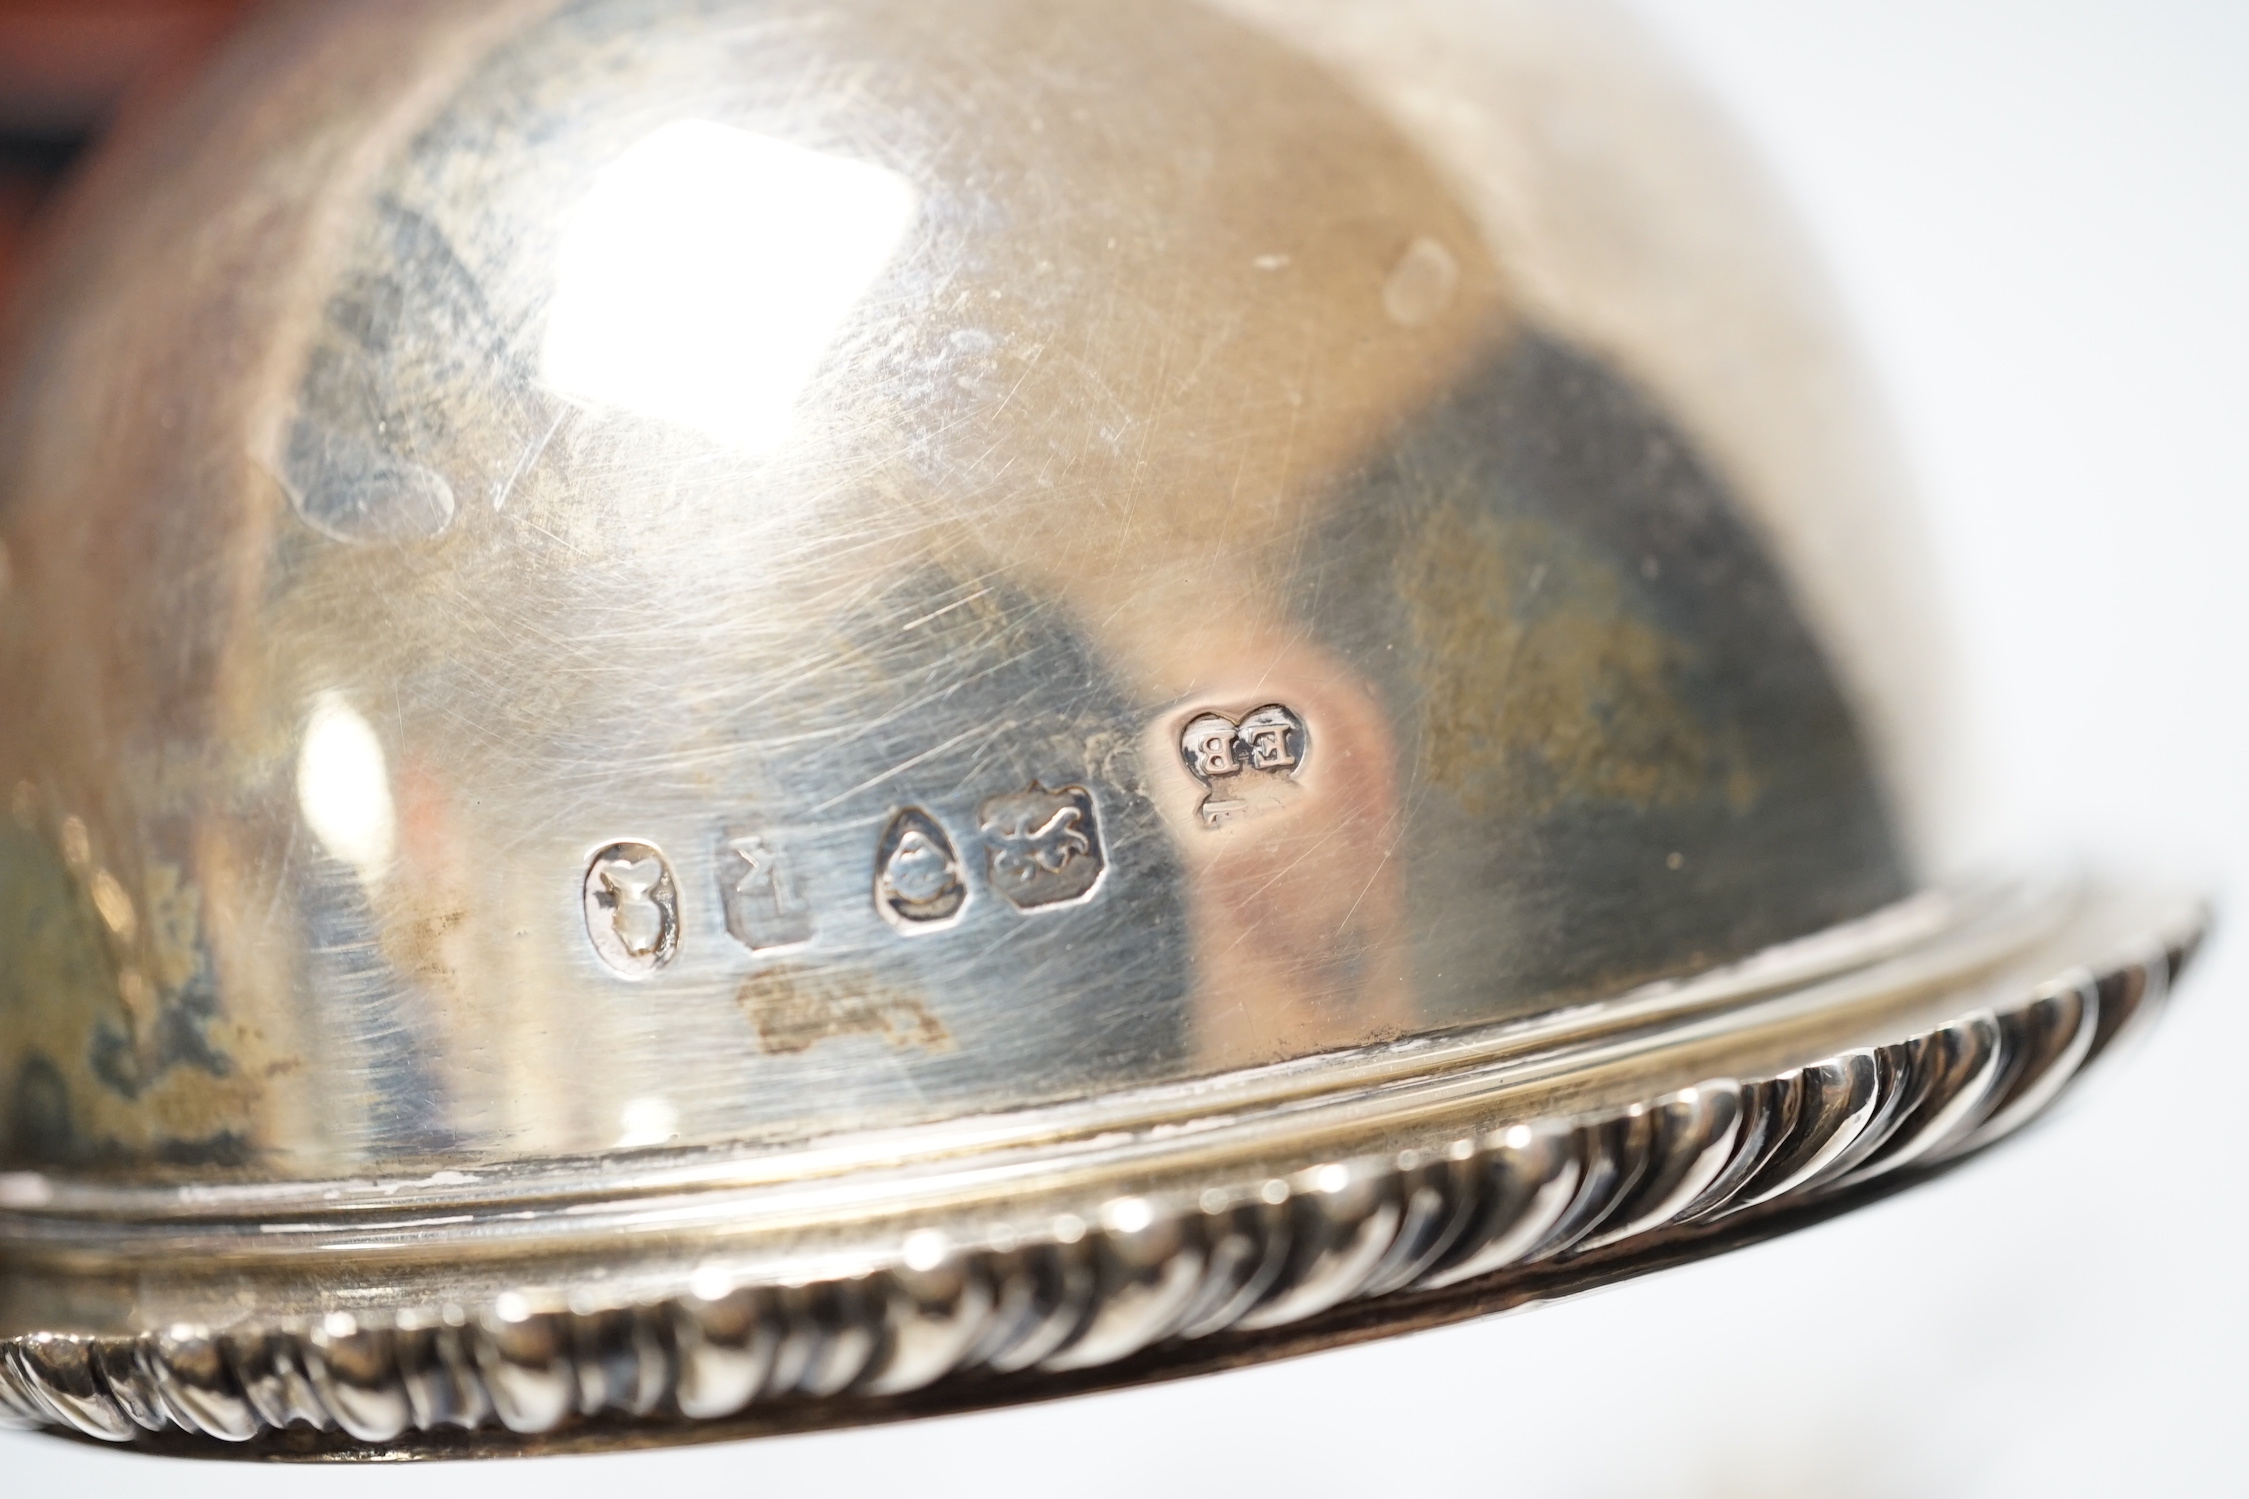 A George IV silver wine funnel, London, 1825, 12.9cm and four George III silver wine labels including pair by Phipps & Robinson, London, 1808/9.